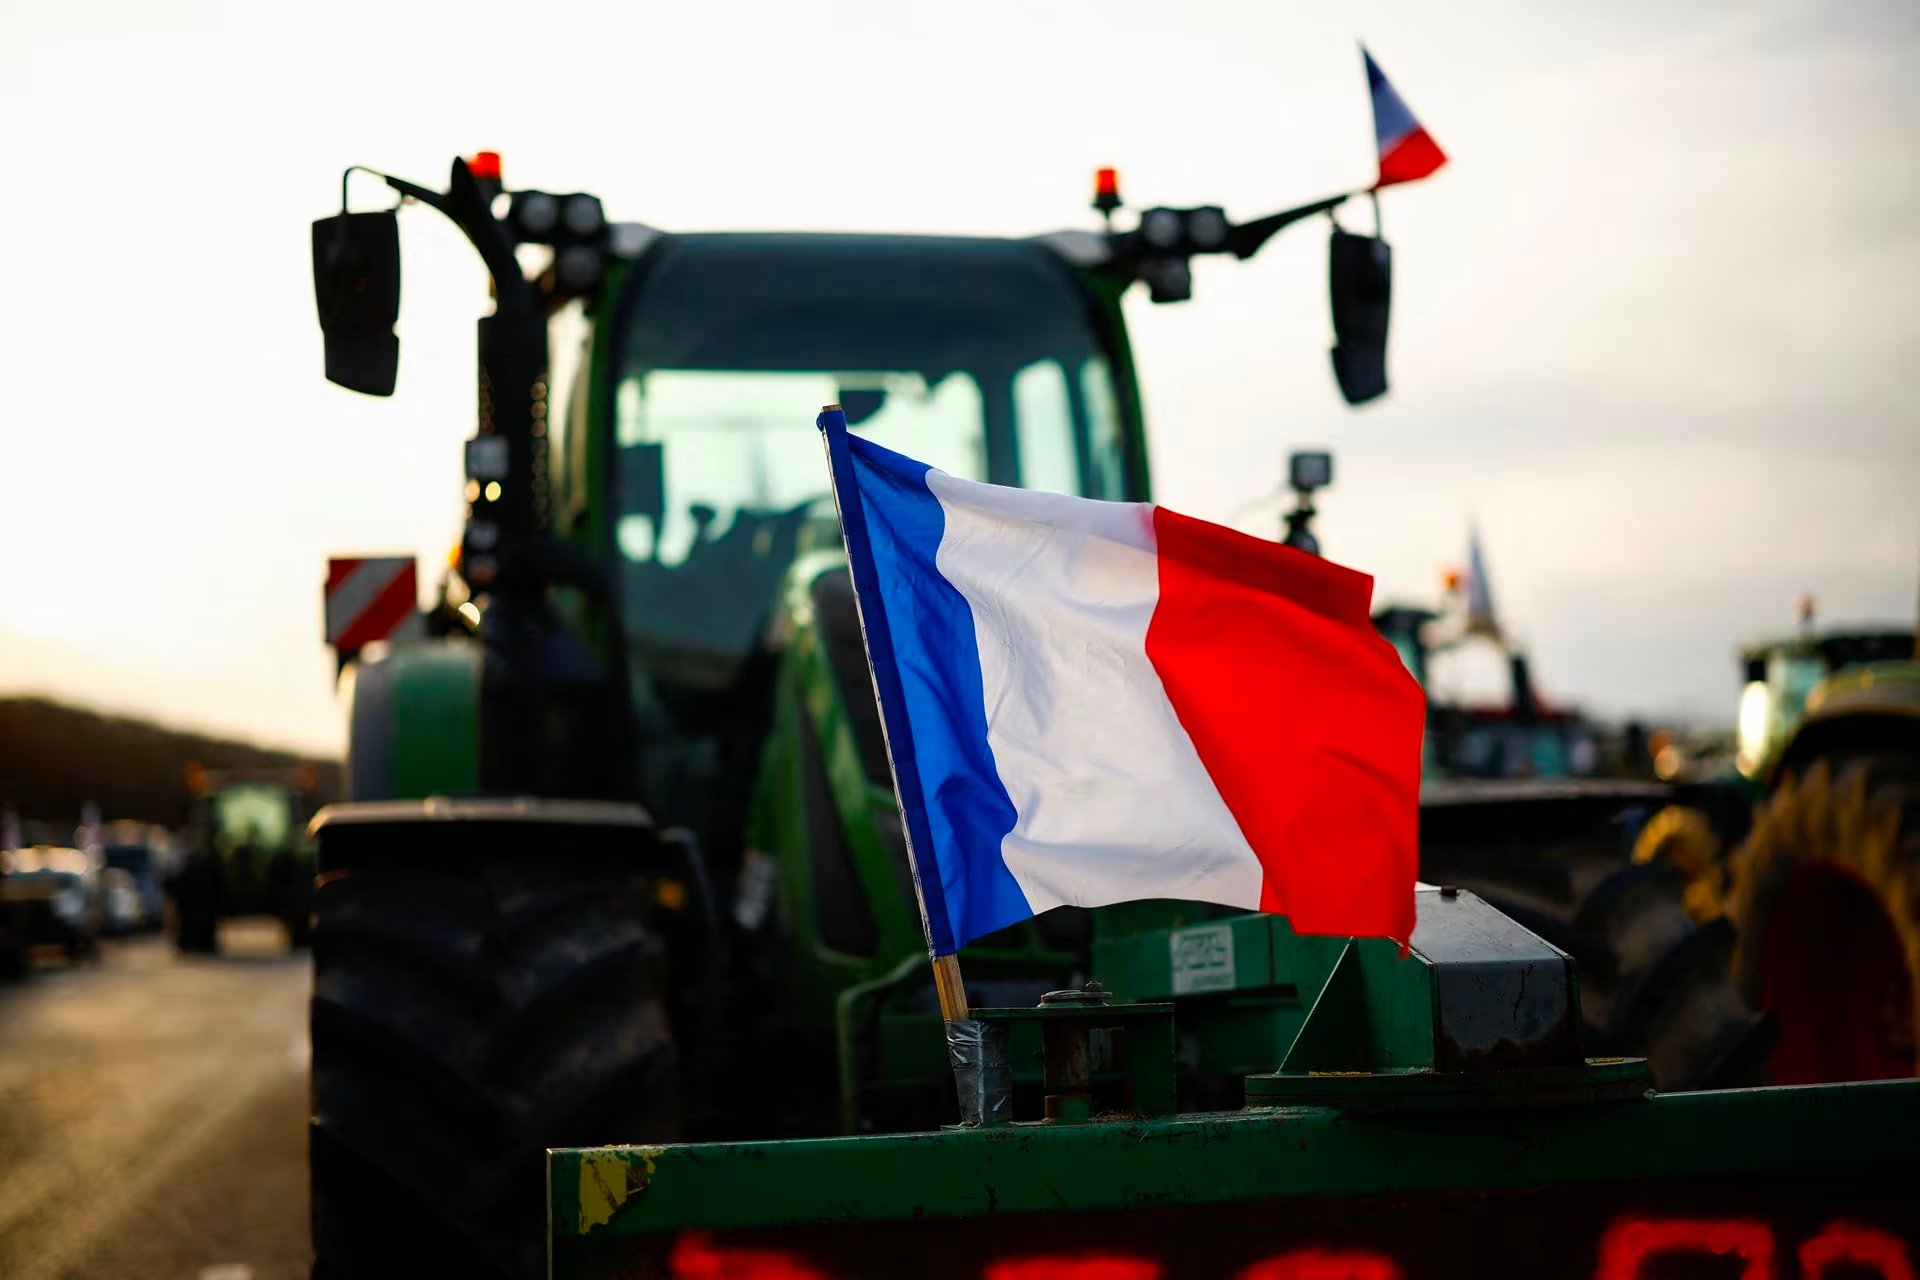 French farmers block a highway with their tractors during a protest over price pressures, taxes and green regulation, grievances shared by farmers across Europe, in Longvilliers, near Paris, France, January 29. Photo: Reuters